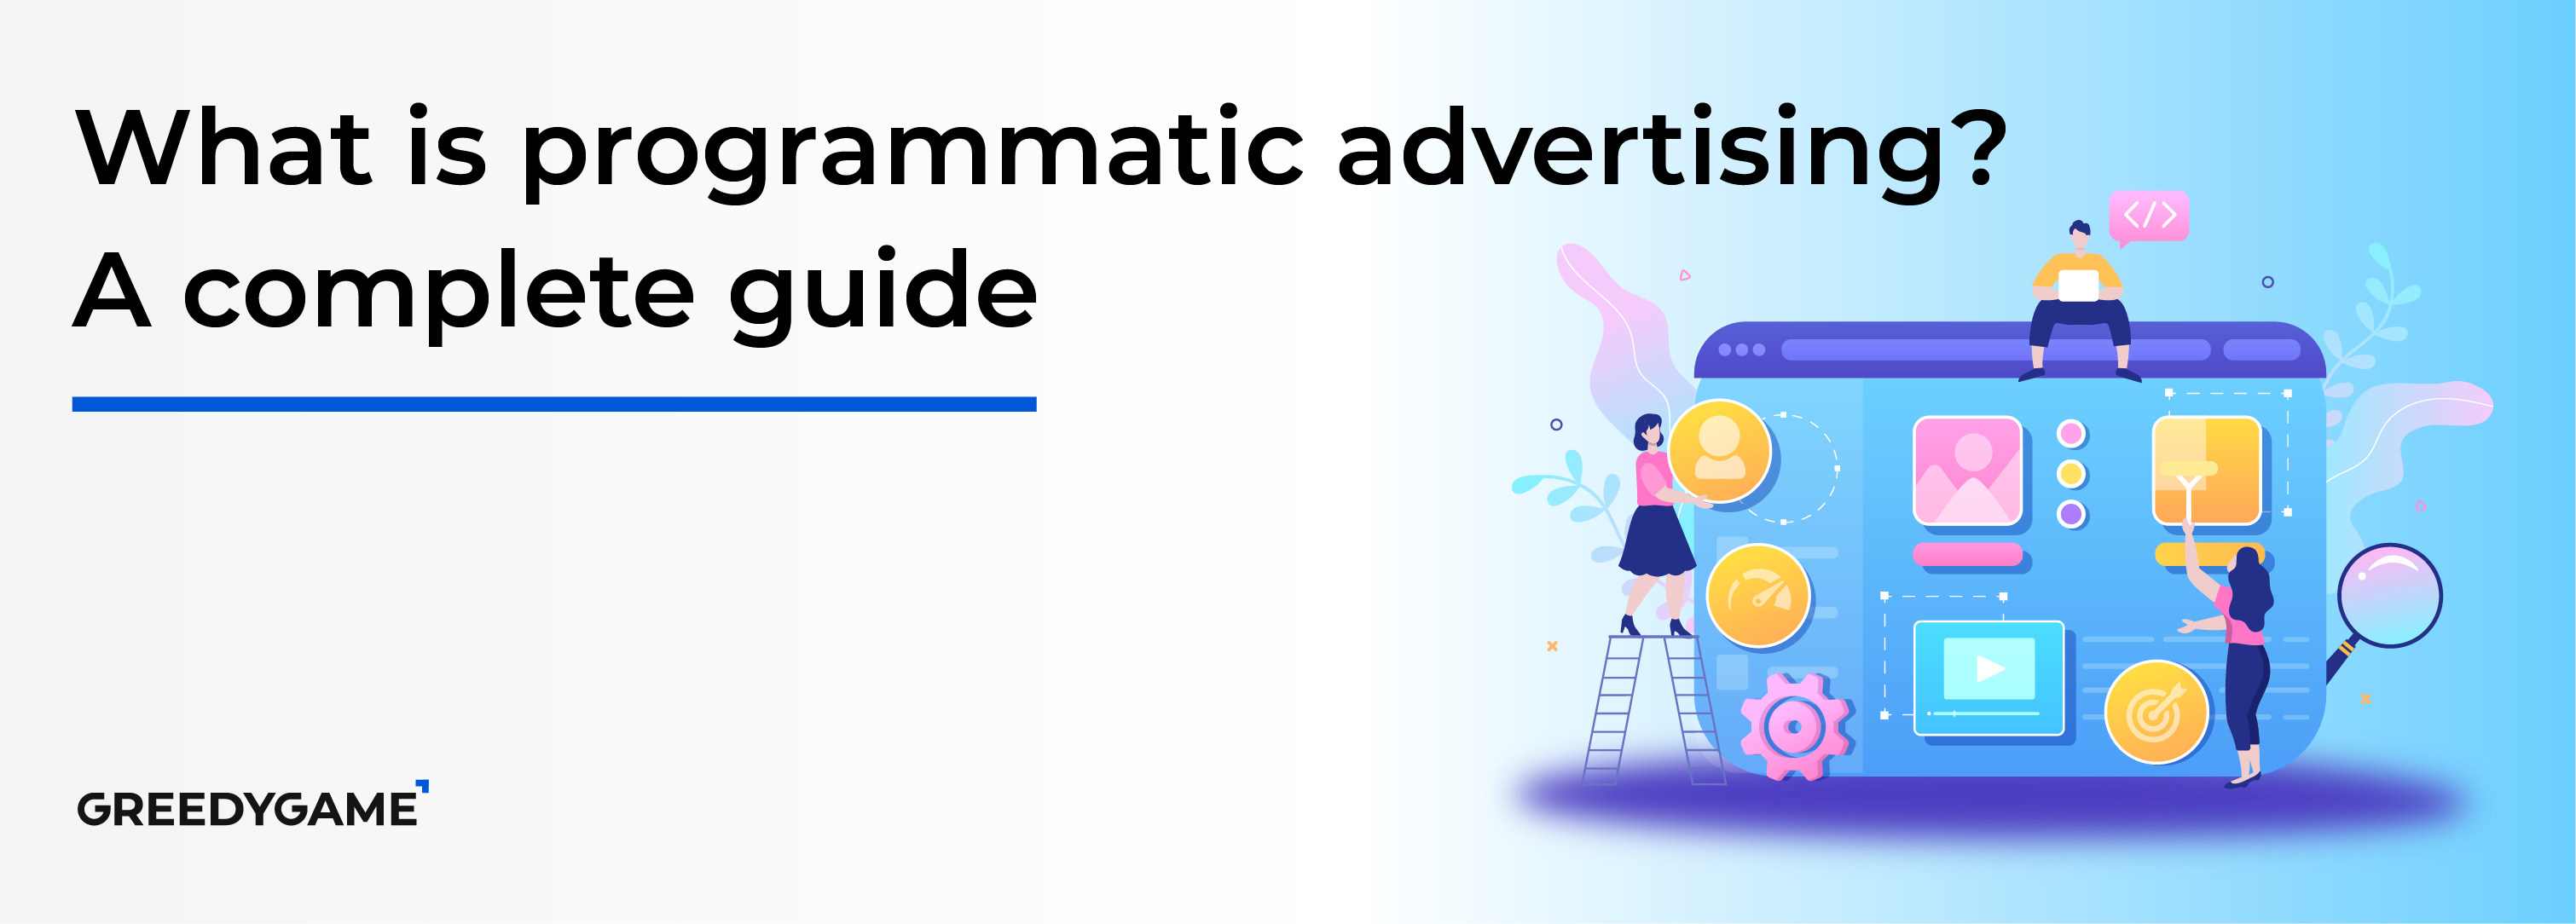 What is programmatic advertising? A complete guide (2022 update)